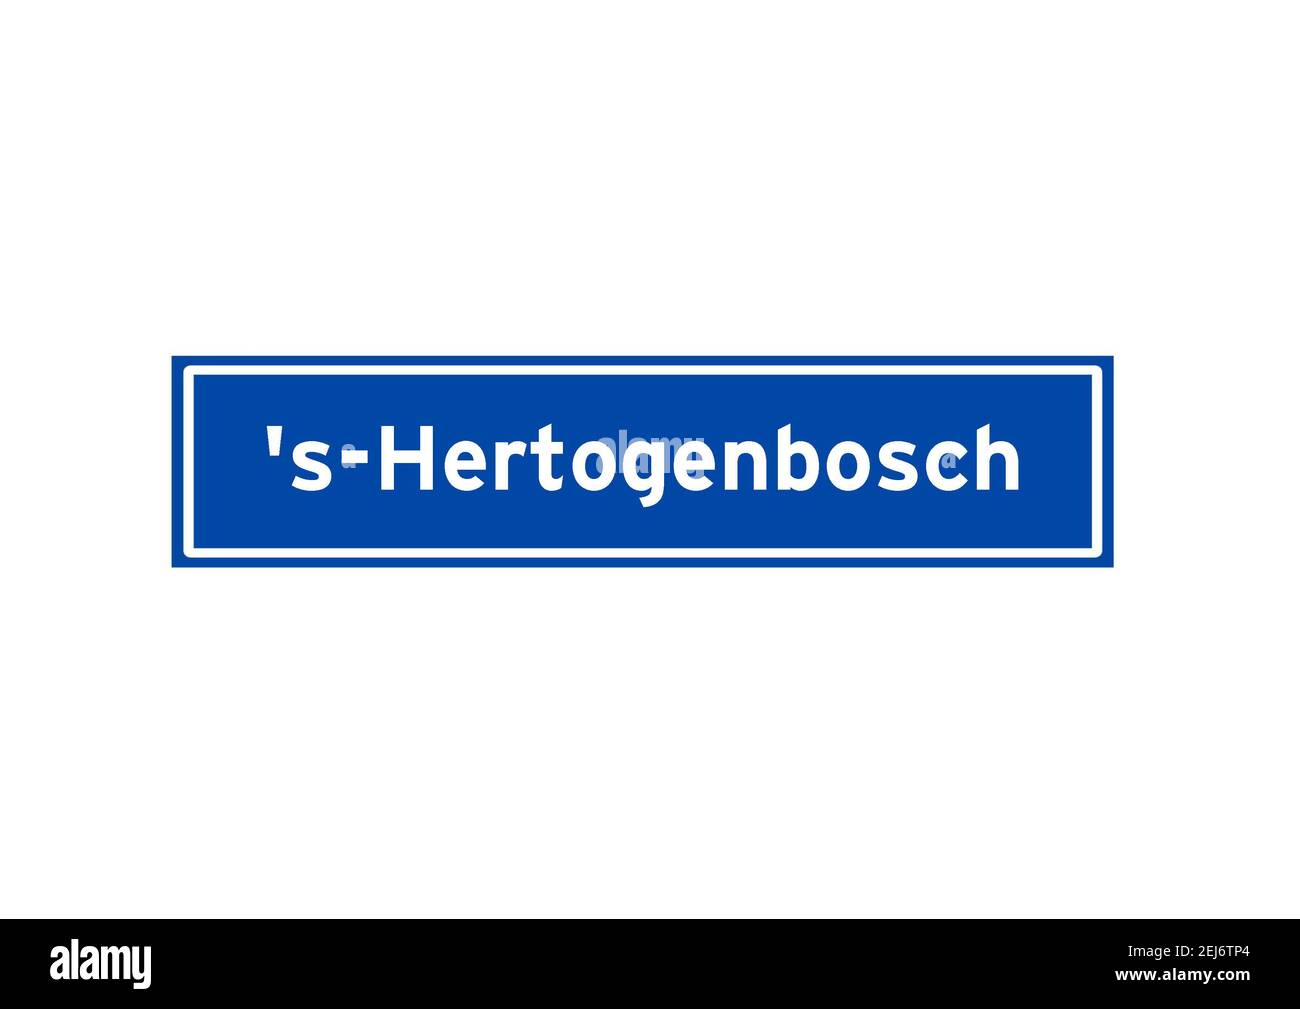 's-Hertogenbosch isolated Dutch place name sign. City sign from the Netherlands. Stock Photo